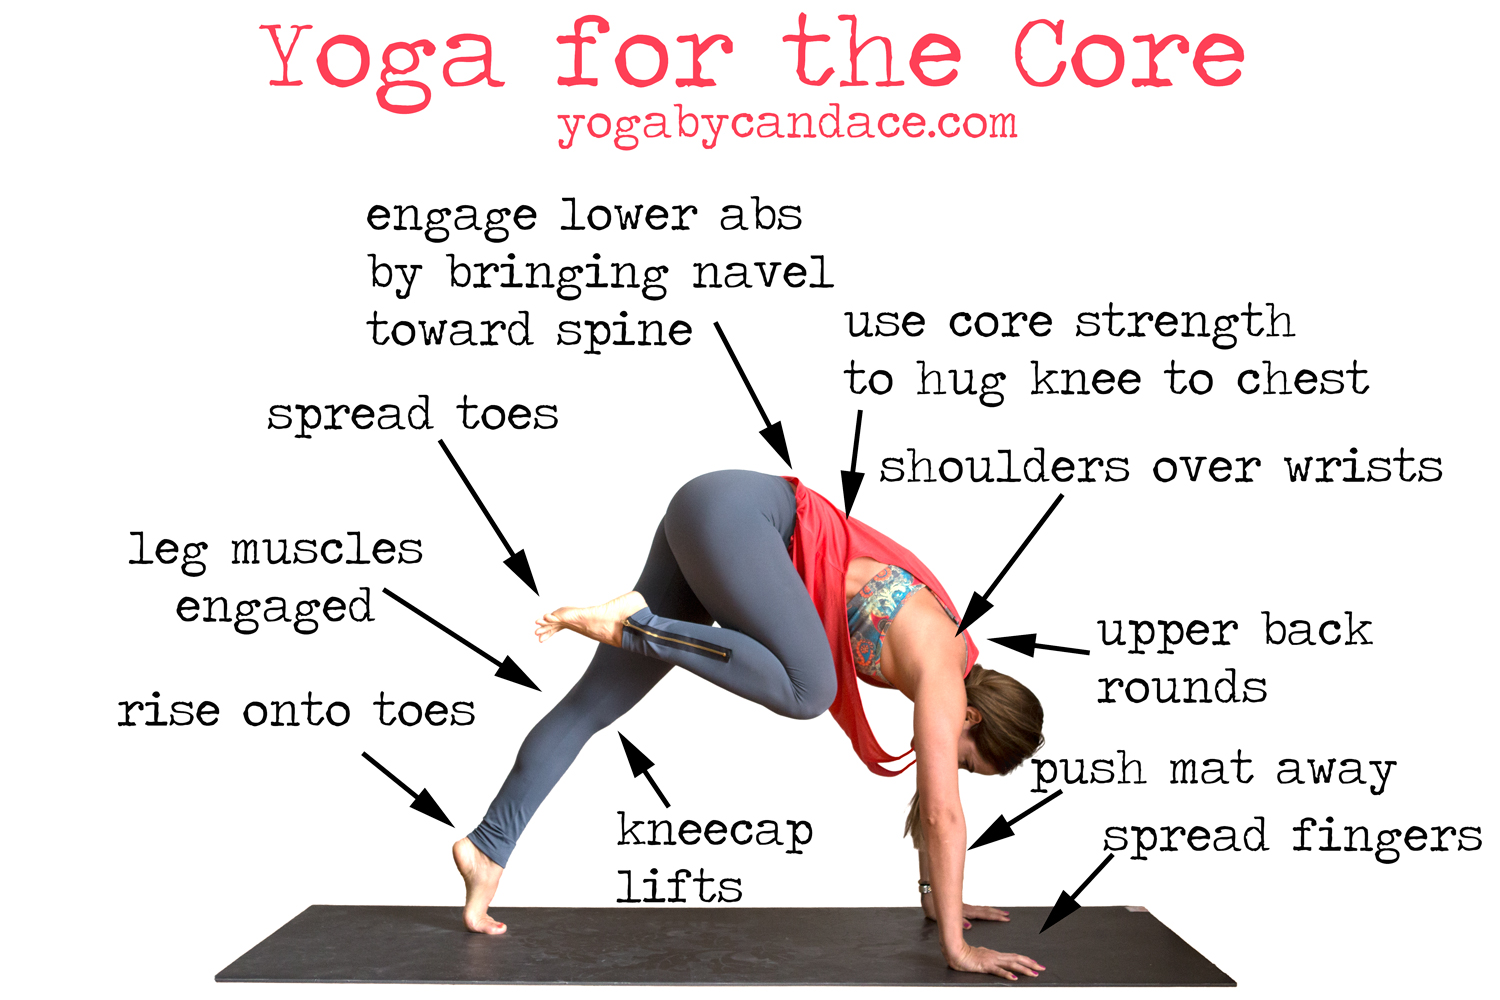 Practice yoga for core strength at home to skip the gym